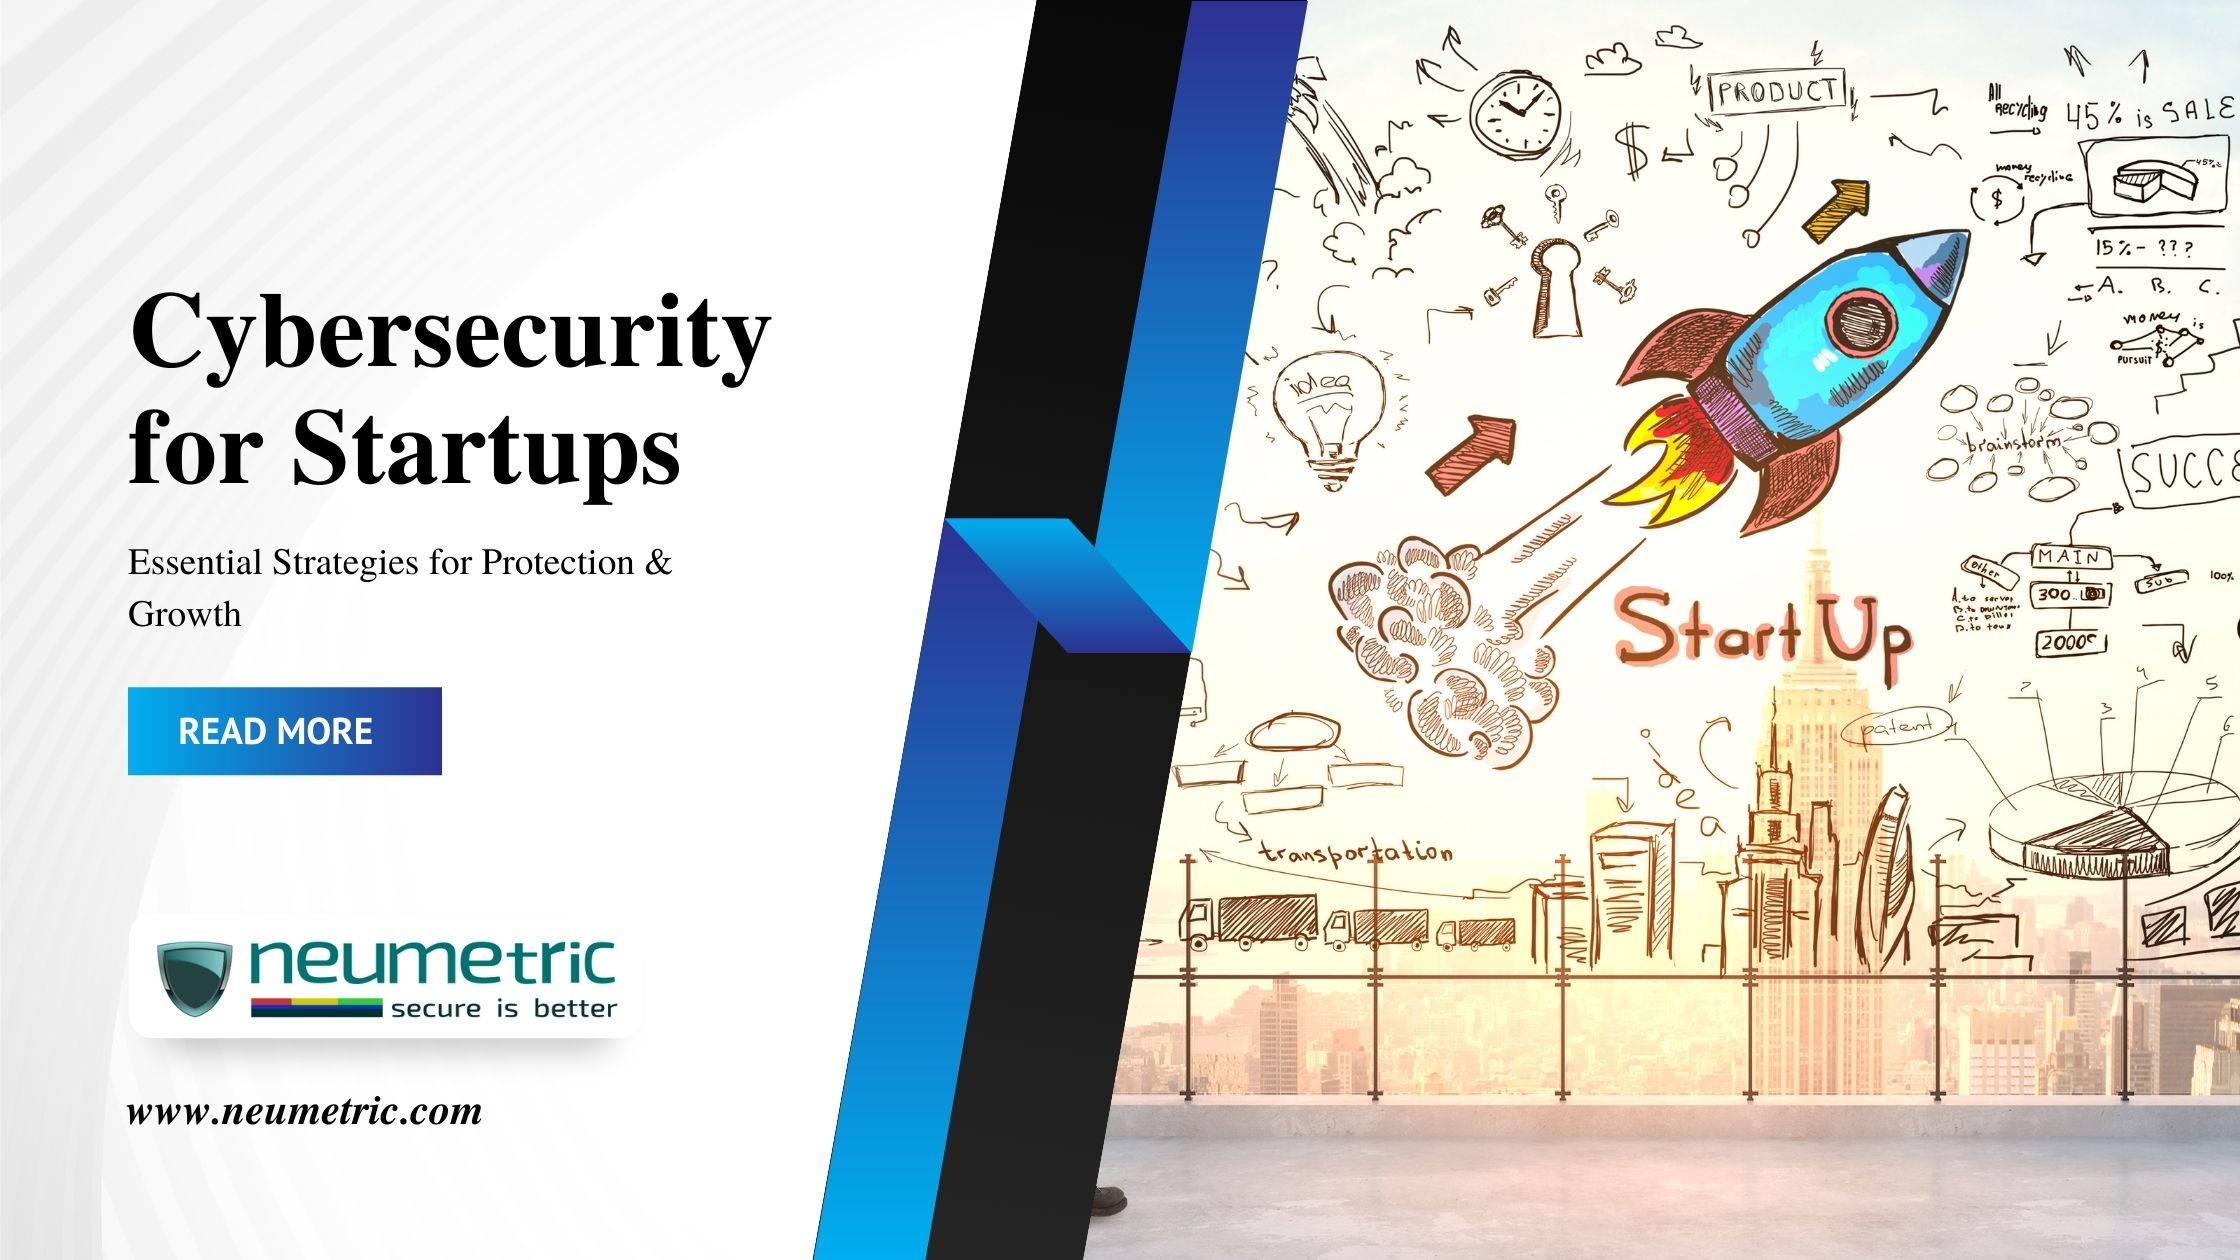 Cybersecurity for Startups: Essential Strategies for Protection & Growth